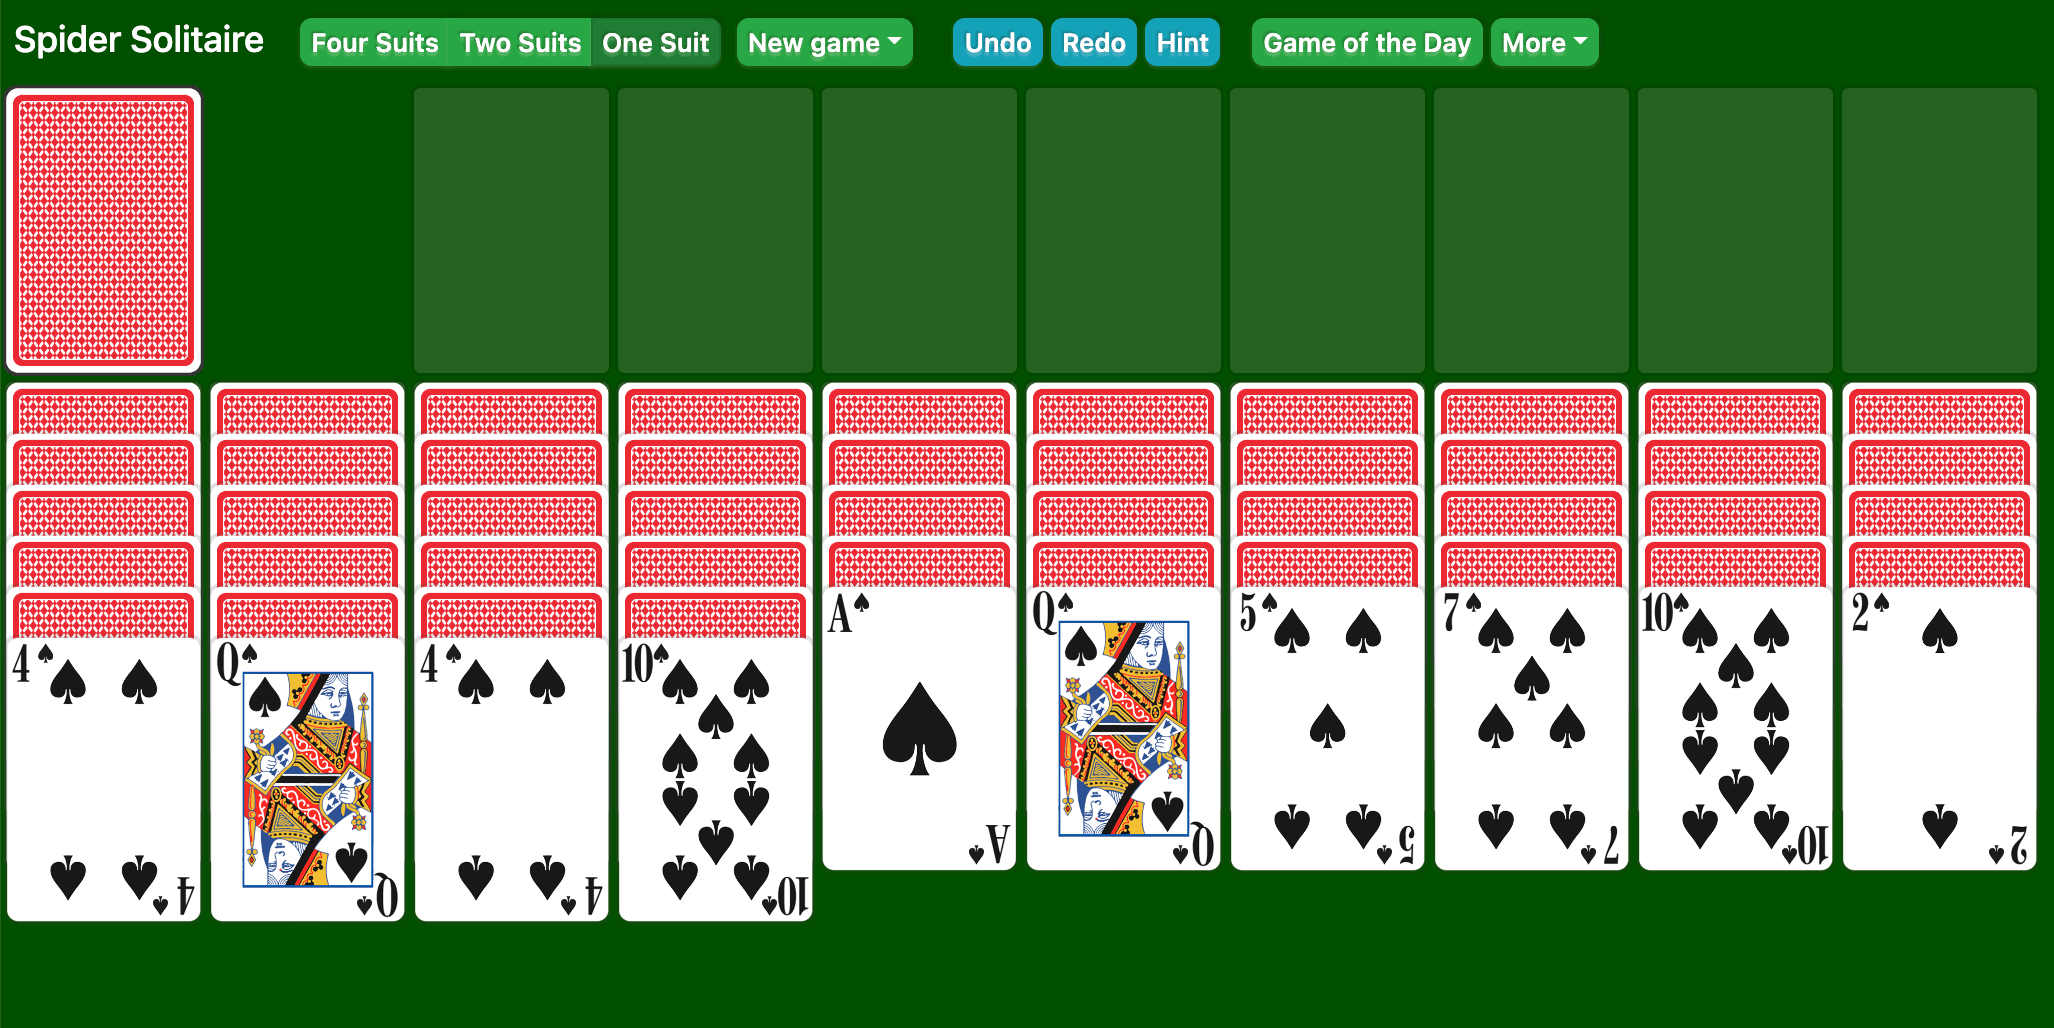 2 suit spider solitaire win rate